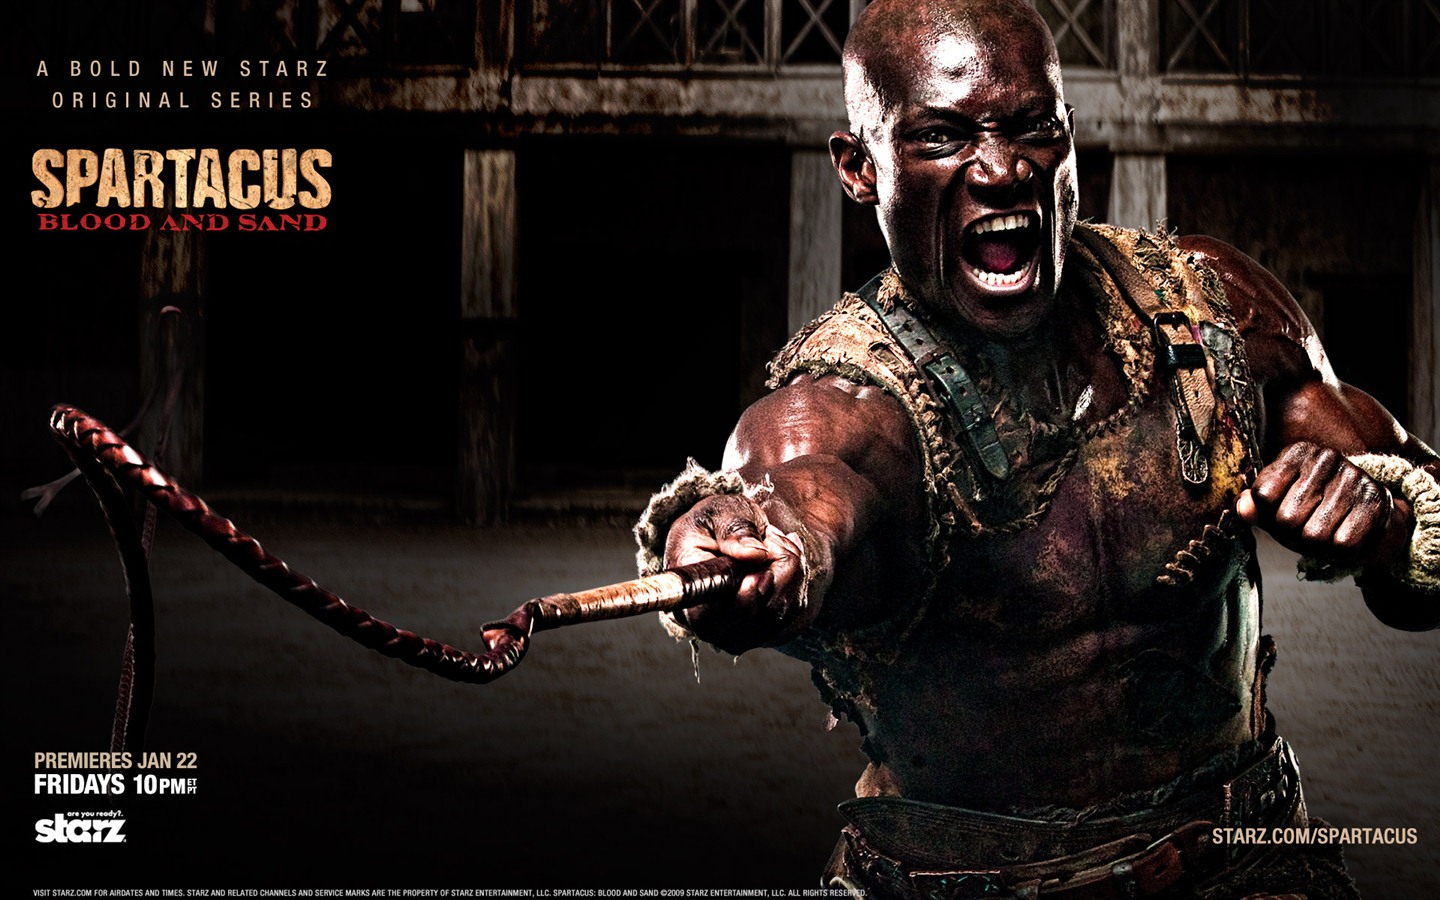 Spartacus: Blood and Sand HD Wallpaper #5 - 1440x900